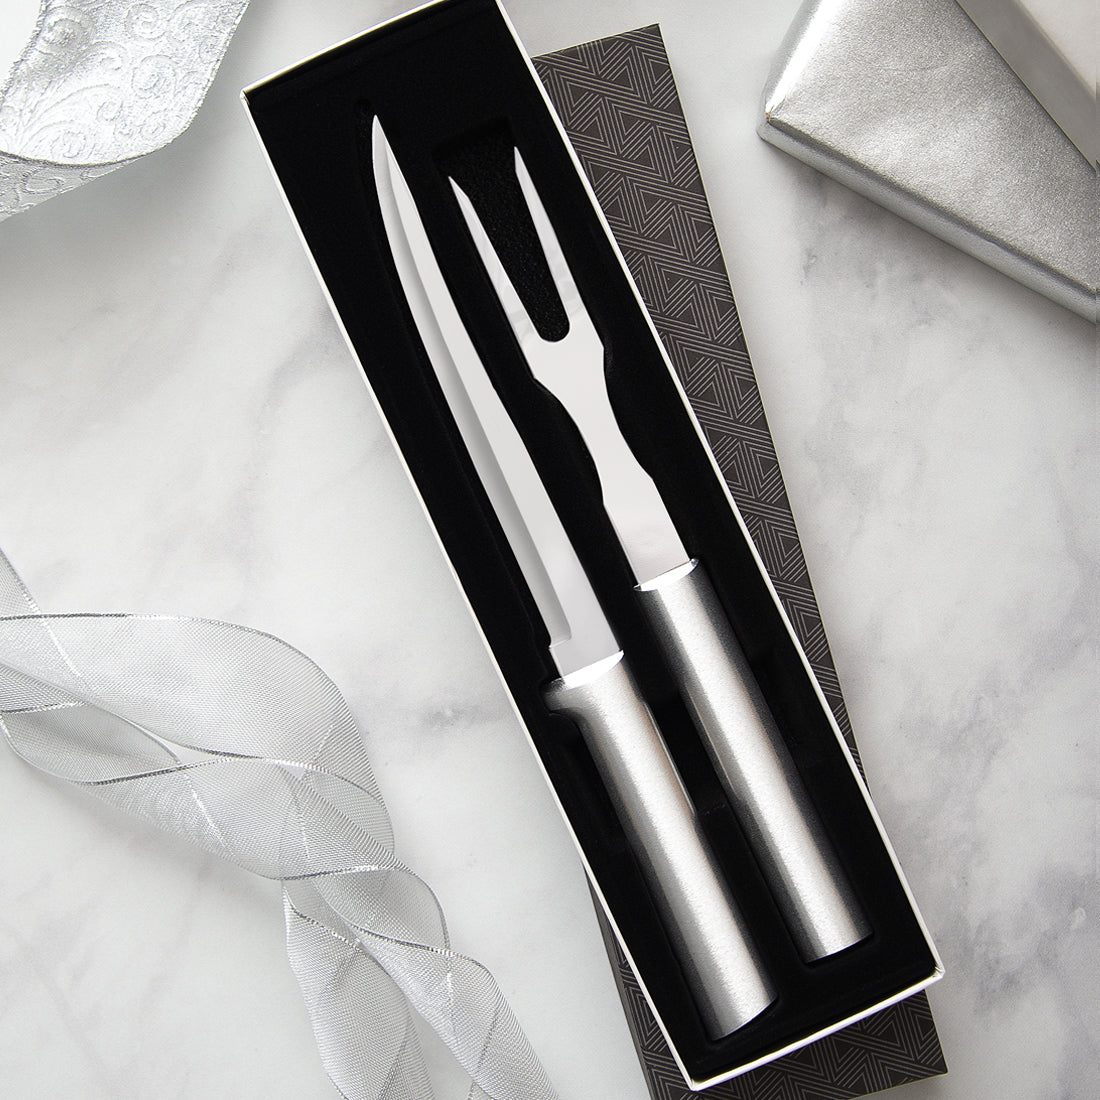 A Carving Gift Set on a marble countertop with silver ribbons